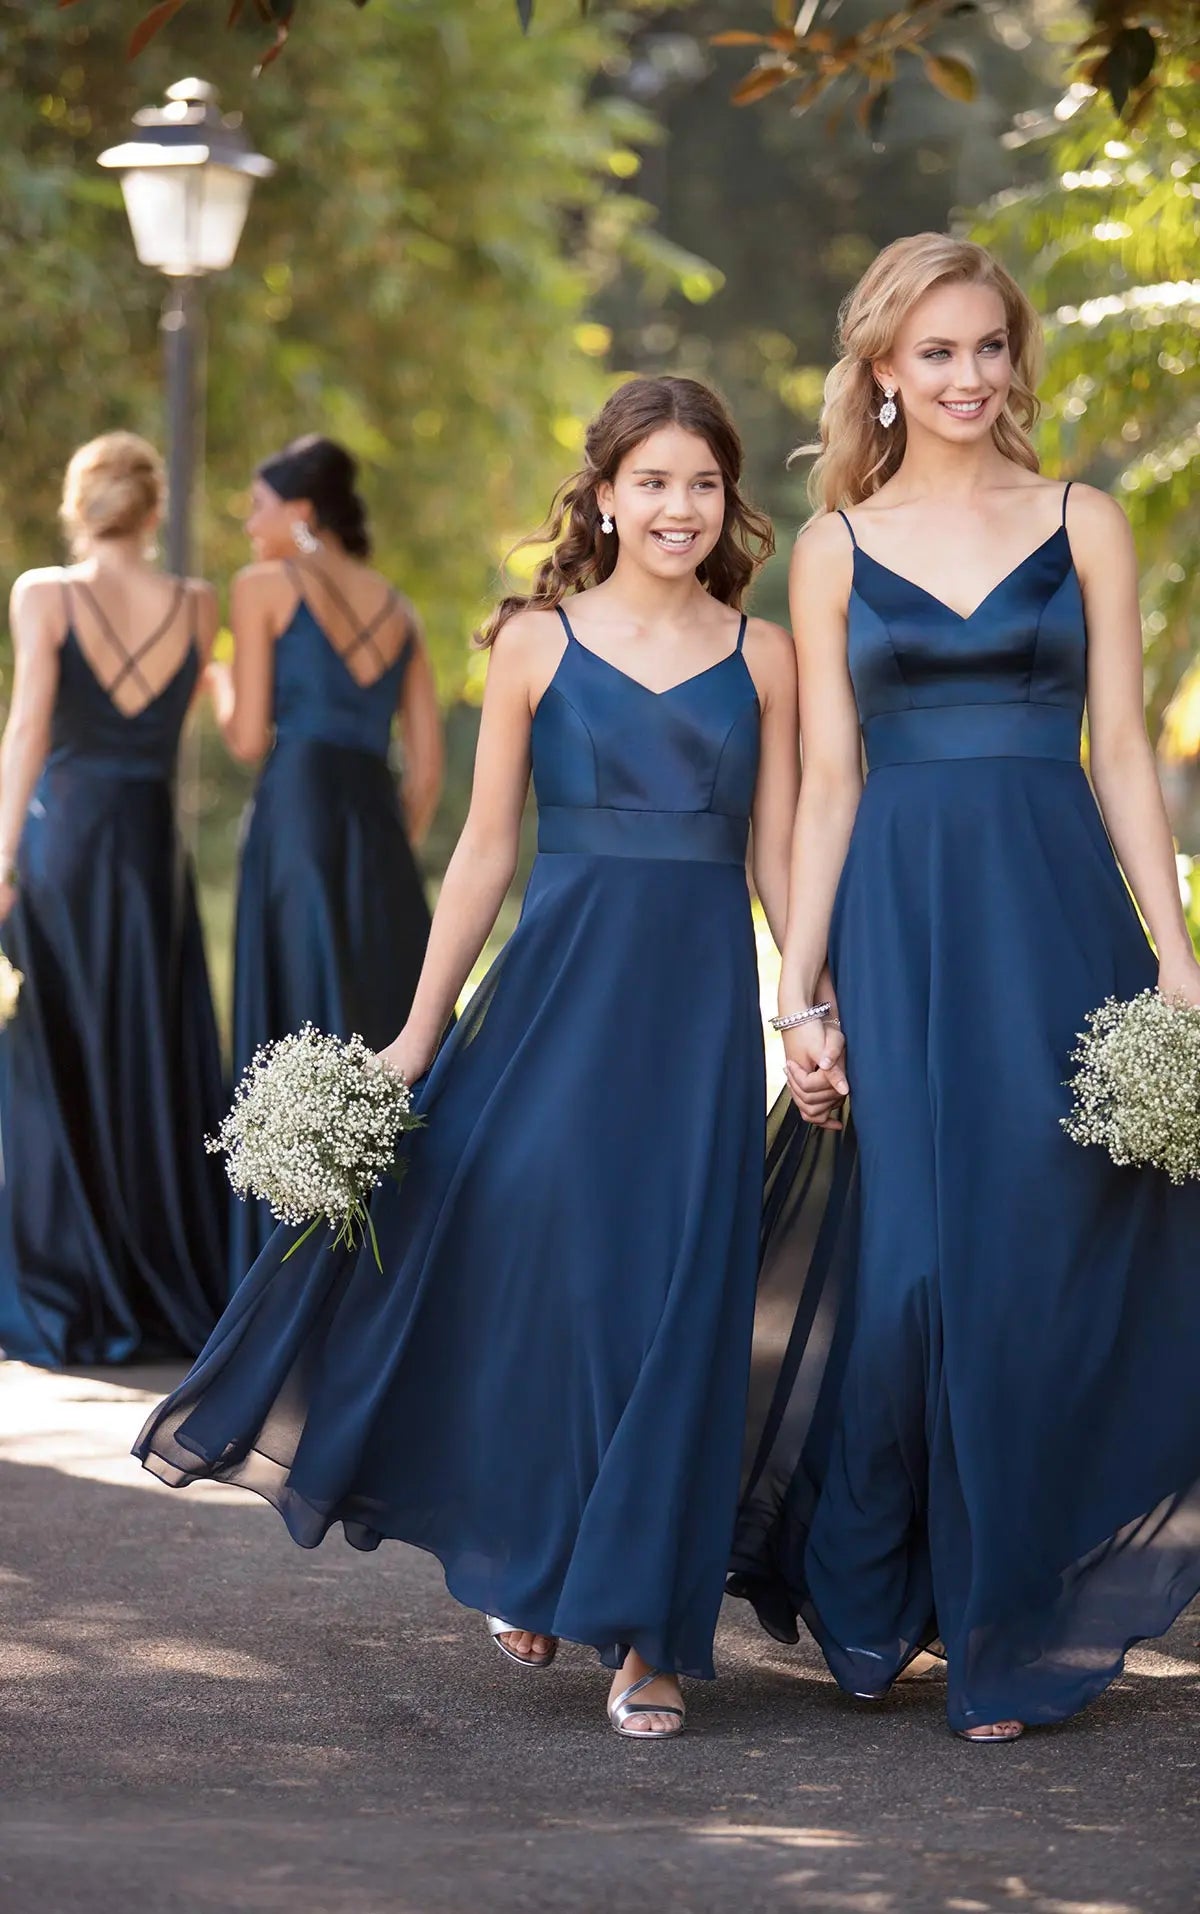 Bridesmaid Dress with Double Banded Waist